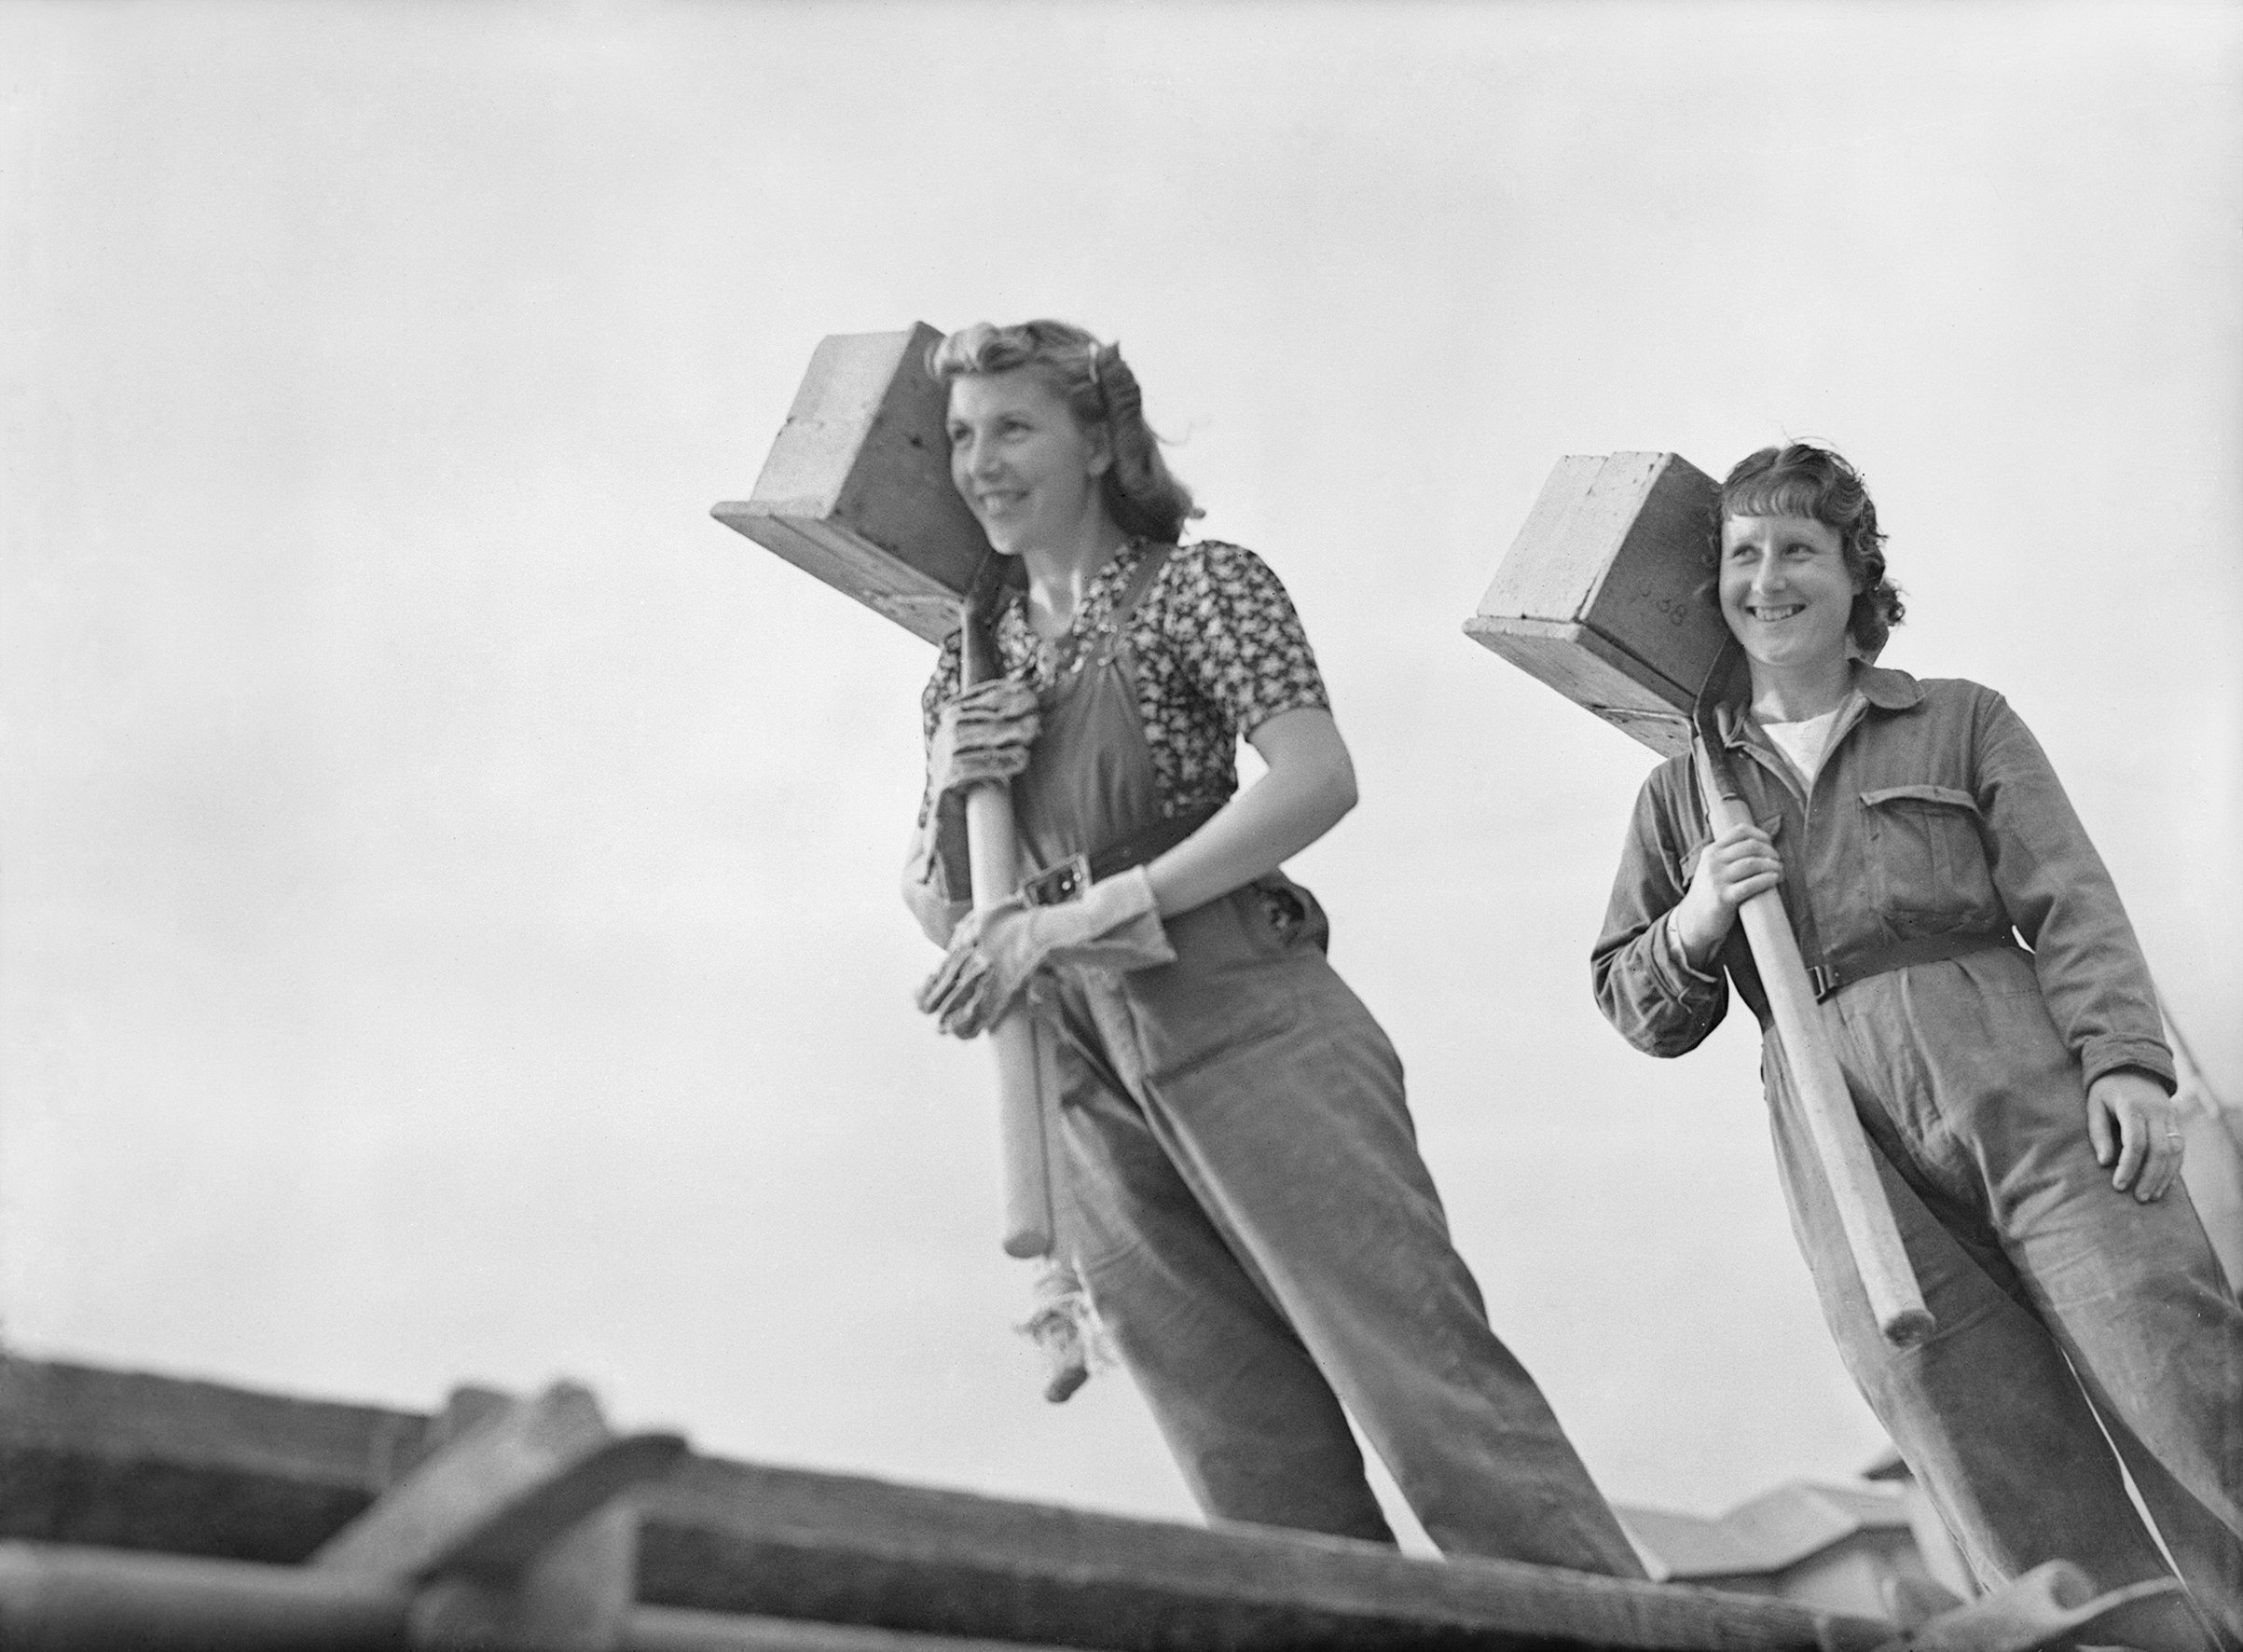 Black and white image of 2 women carrying bricks